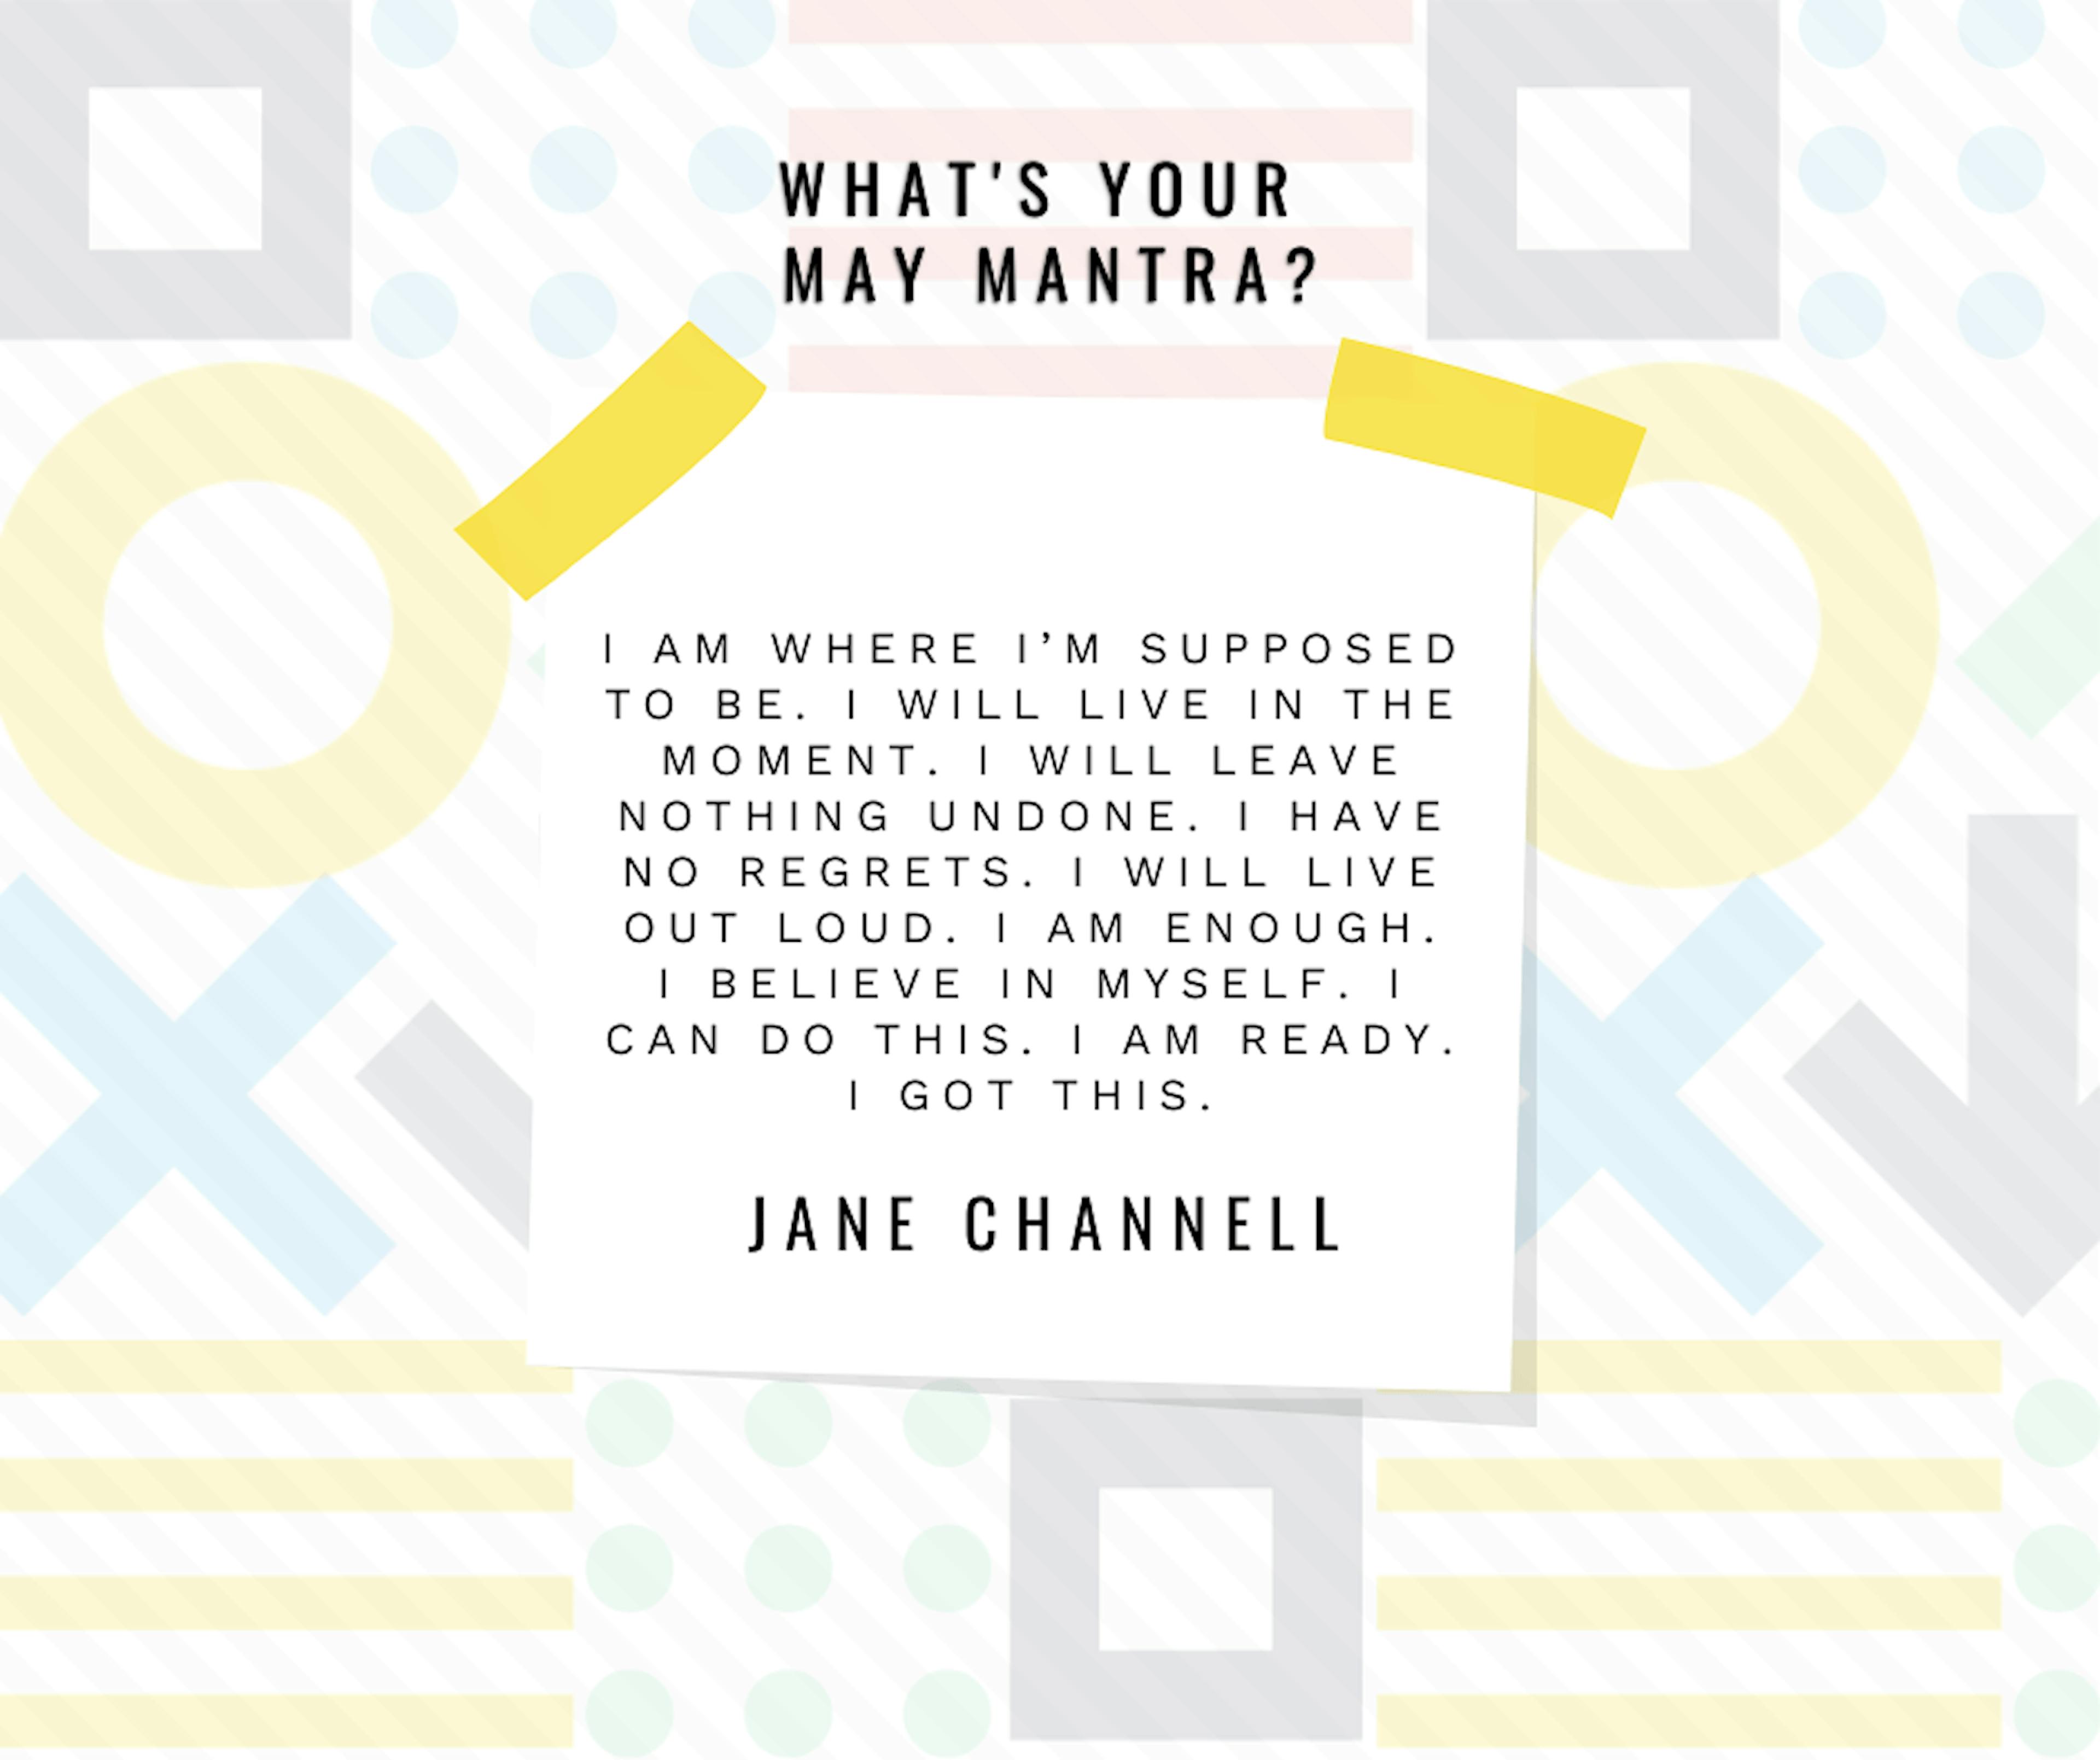 Quote from Jane Channell overlaying a colorful background